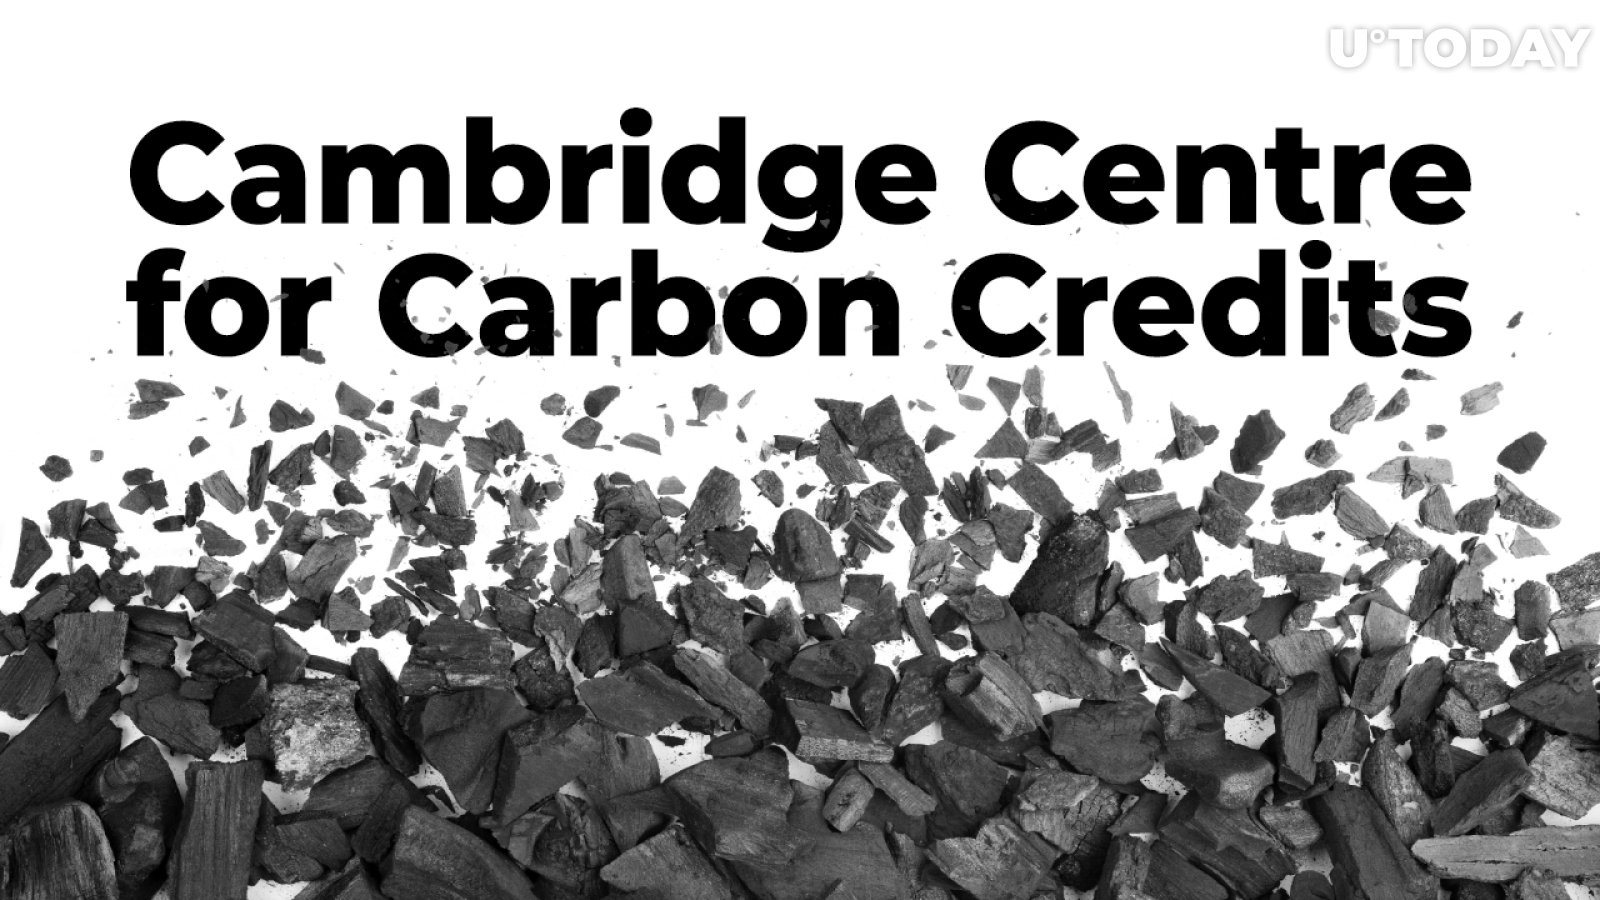 Tezos-Based Cambridge Centre for Carbon Credits to Support Reforestation Initiatives